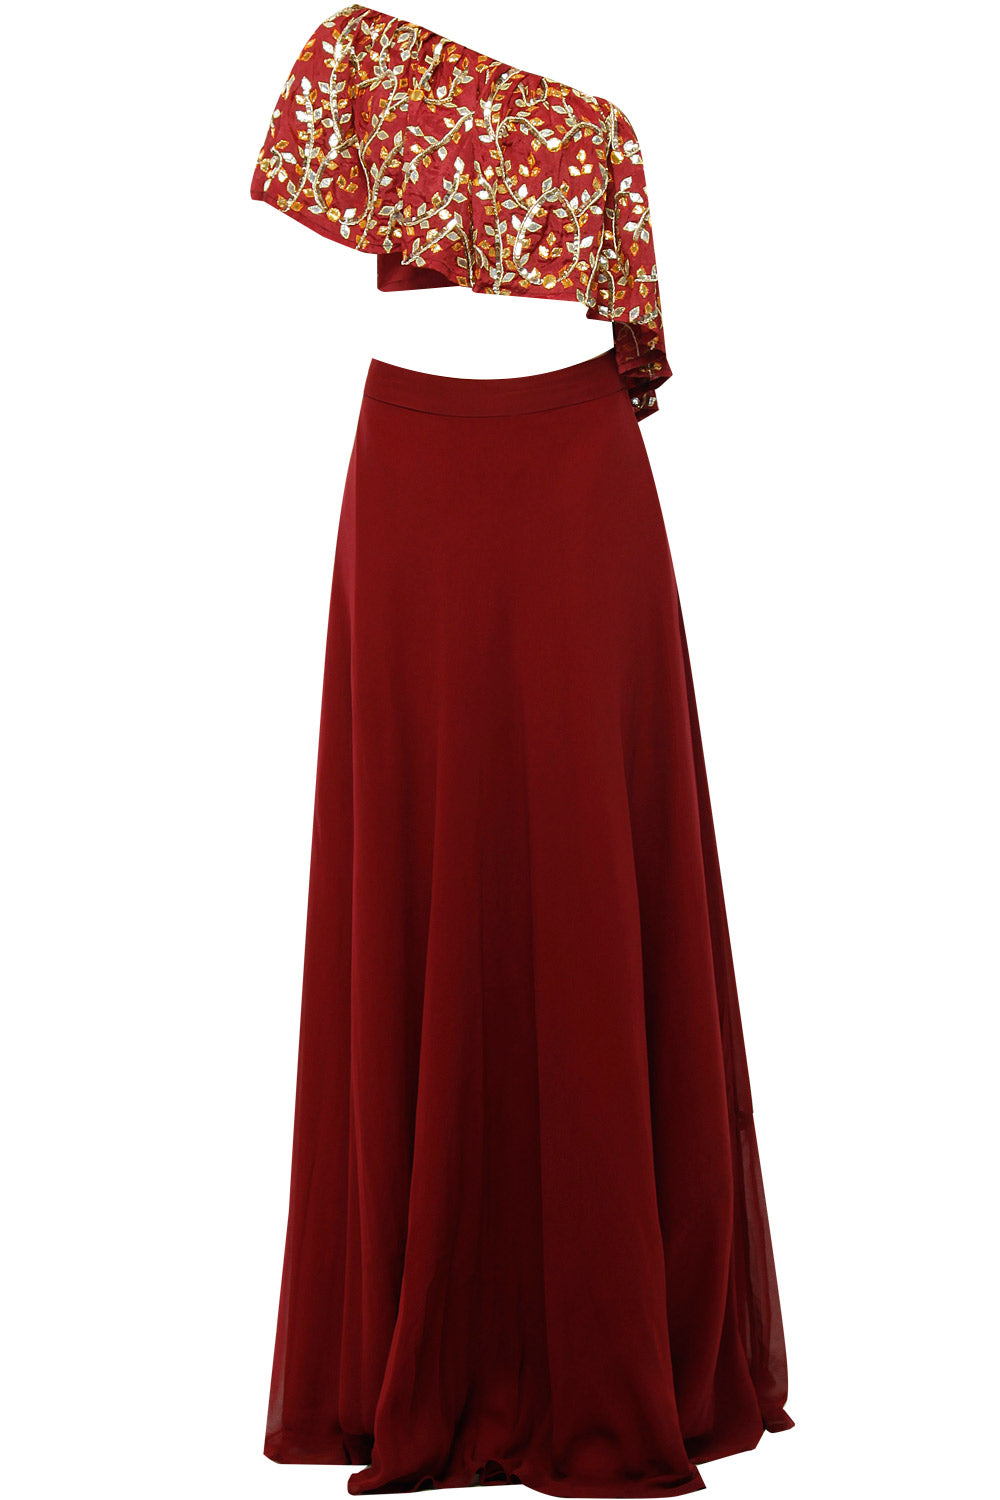 Maroon top & skirt set - The Grand Trunk